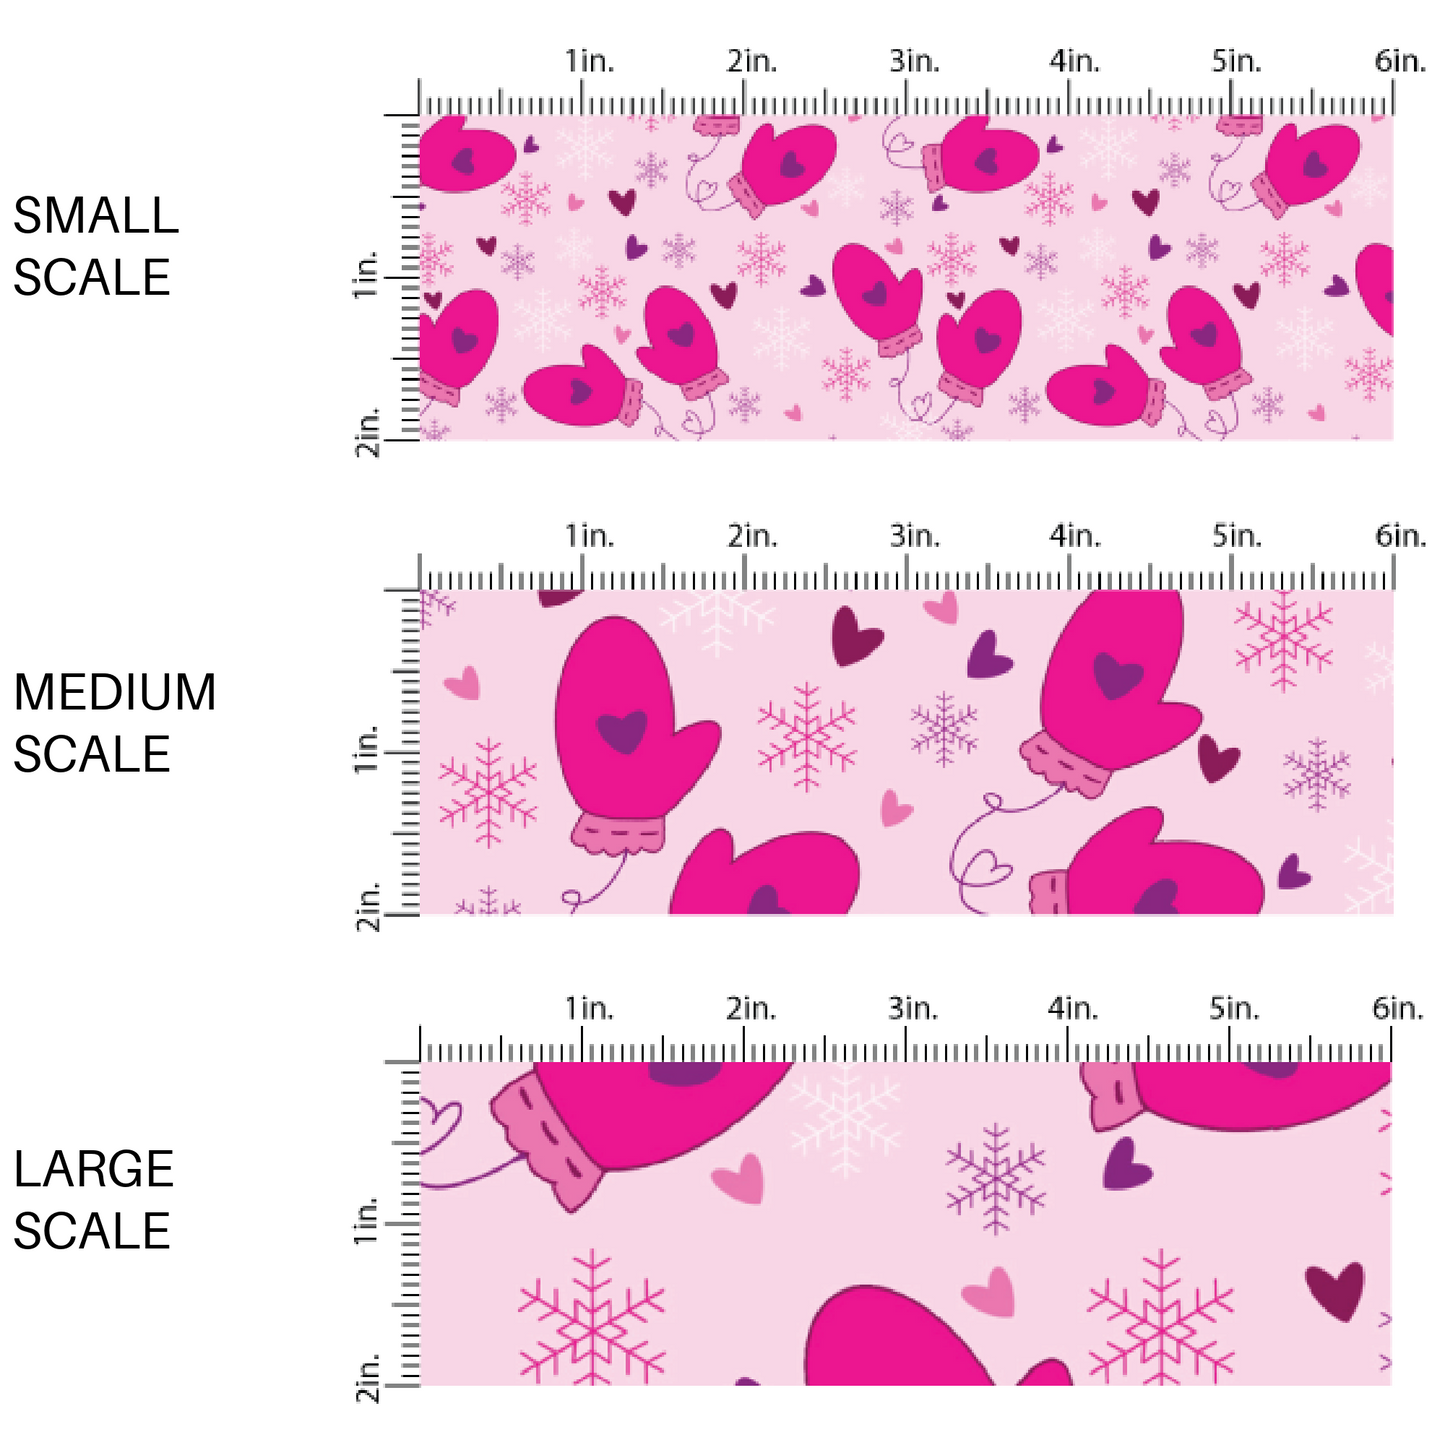 Pink fabric by the yard scaled image guide with hearts, snowflakes, and mittens.